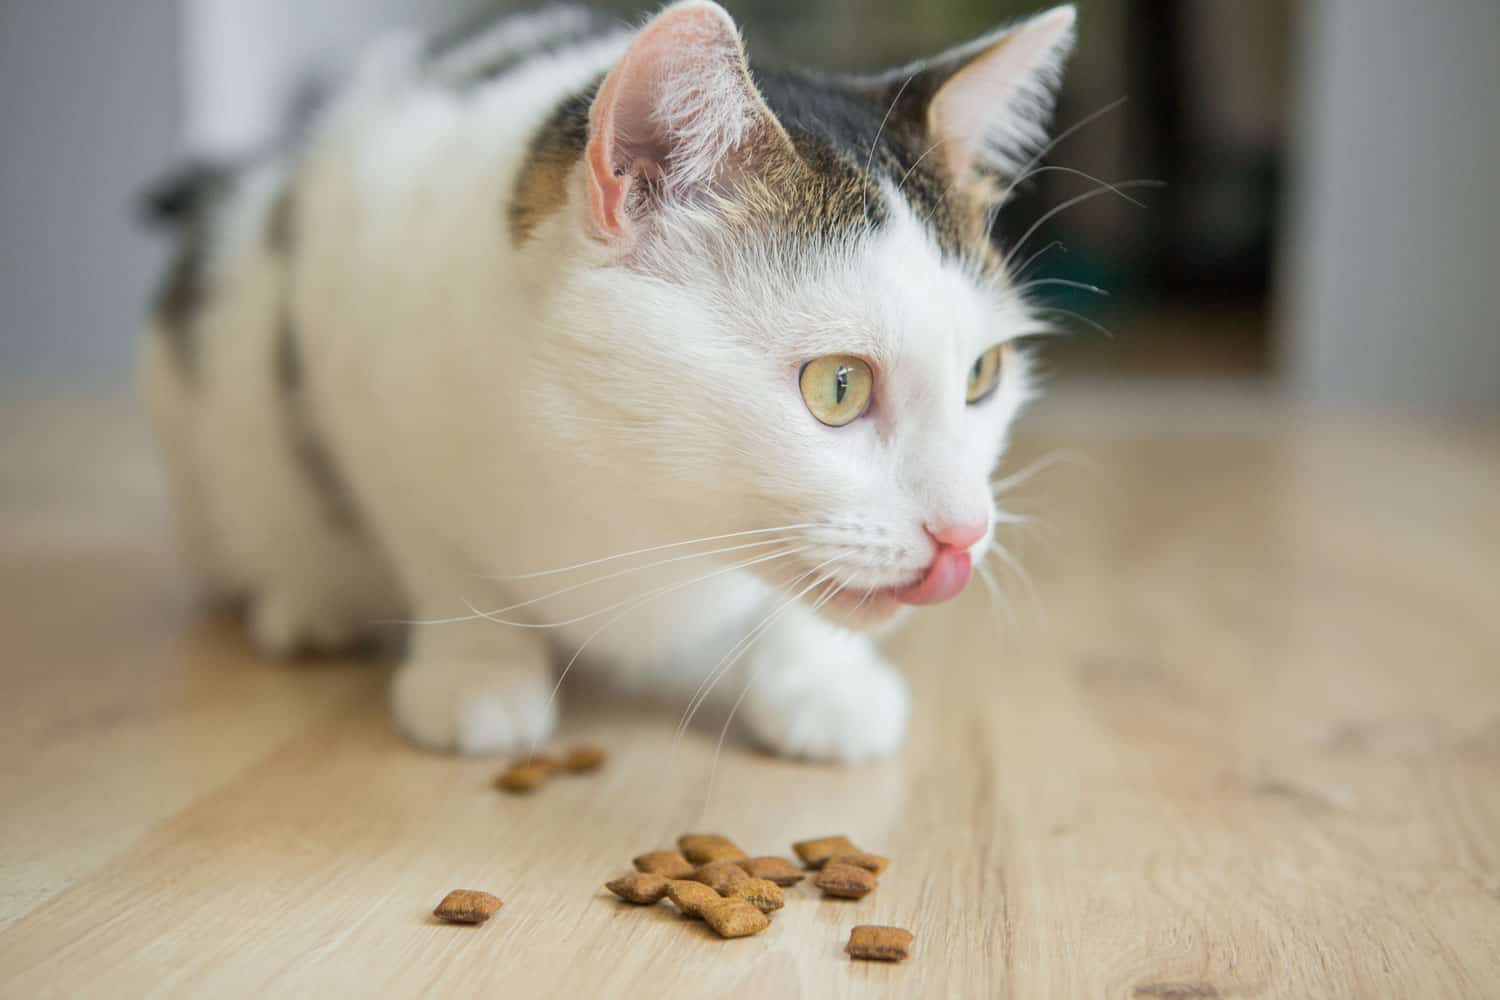 Giving cat treats to a cat